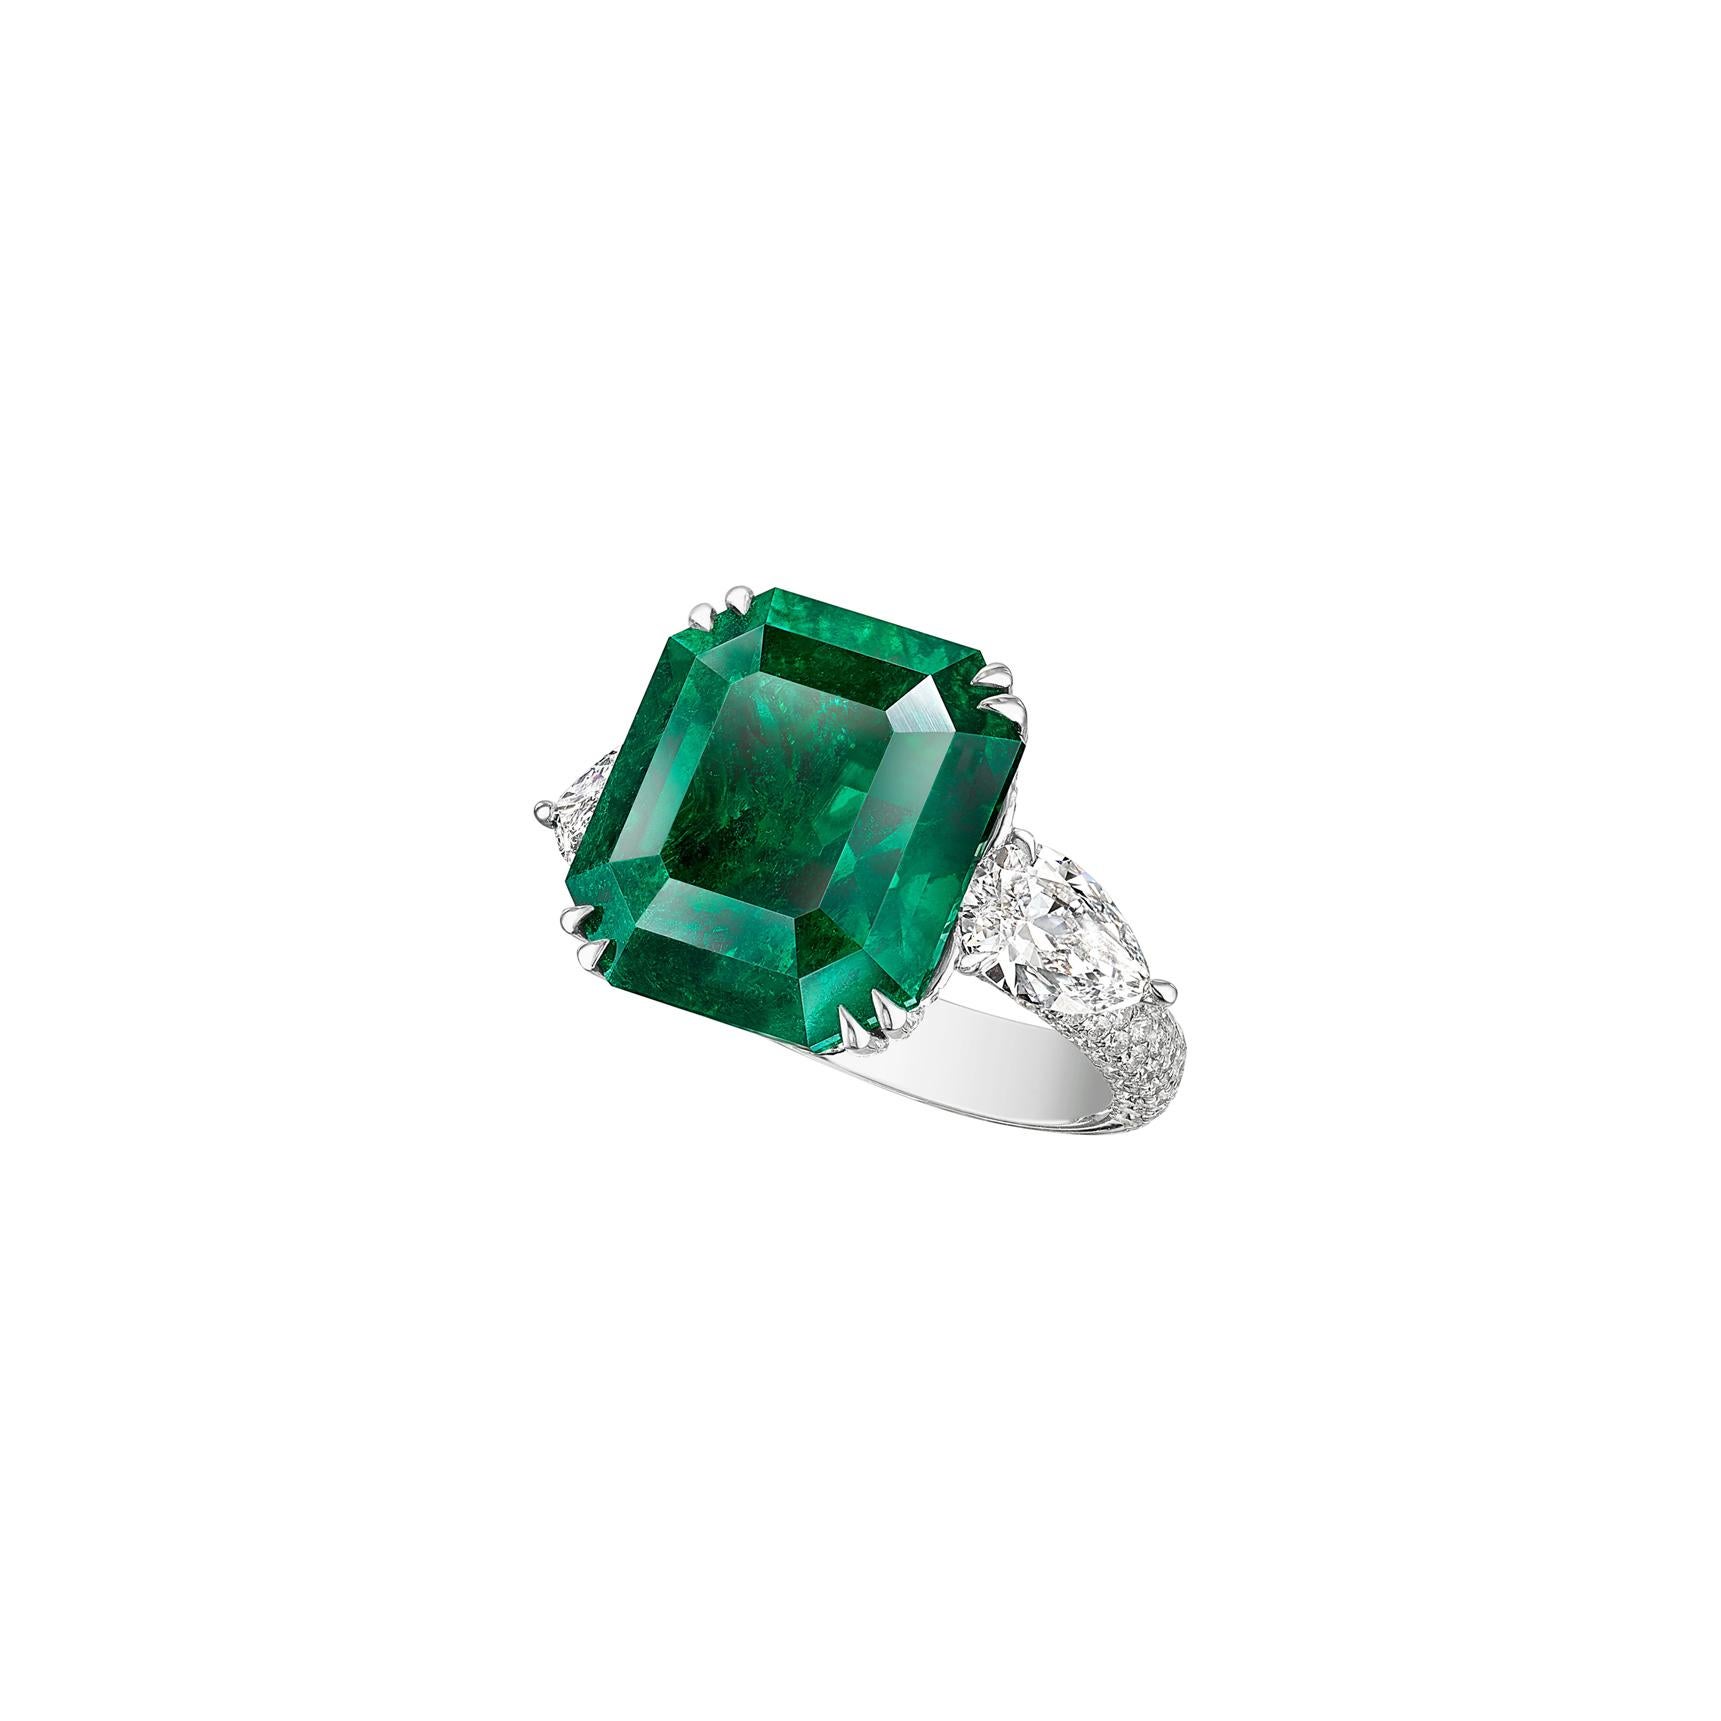 Gubelin Certified 15.73 Carat Colombian No Oil Emerald and Diamond Ring